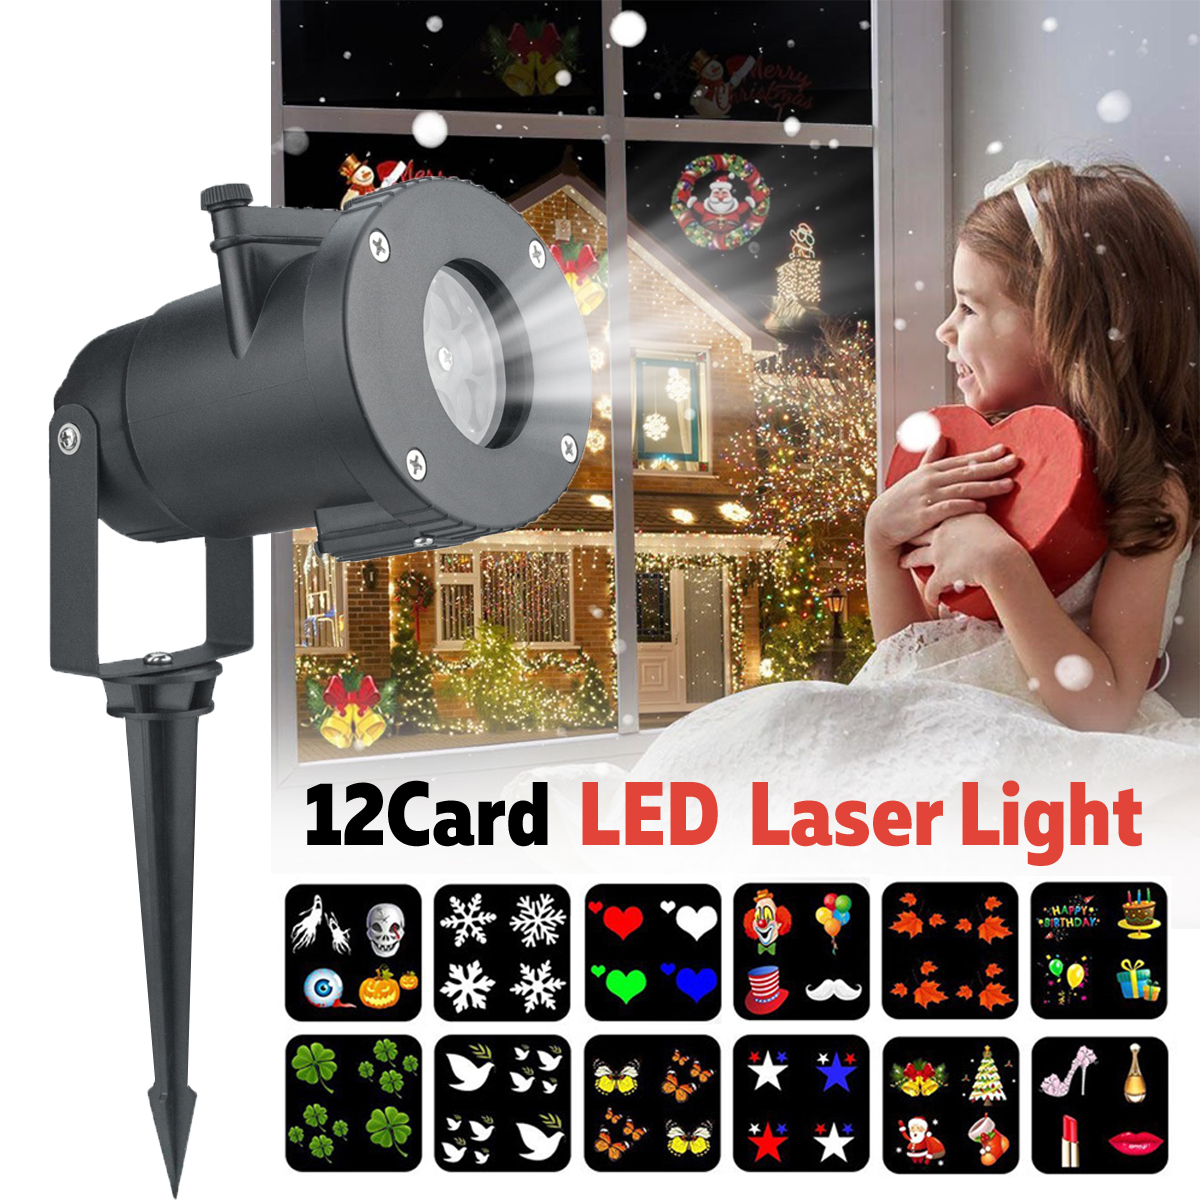 LED-Mini-Projector-Stage-Light-Adjustable-Waterproof-Lamp-with-12-Slide-Card-1343295-2